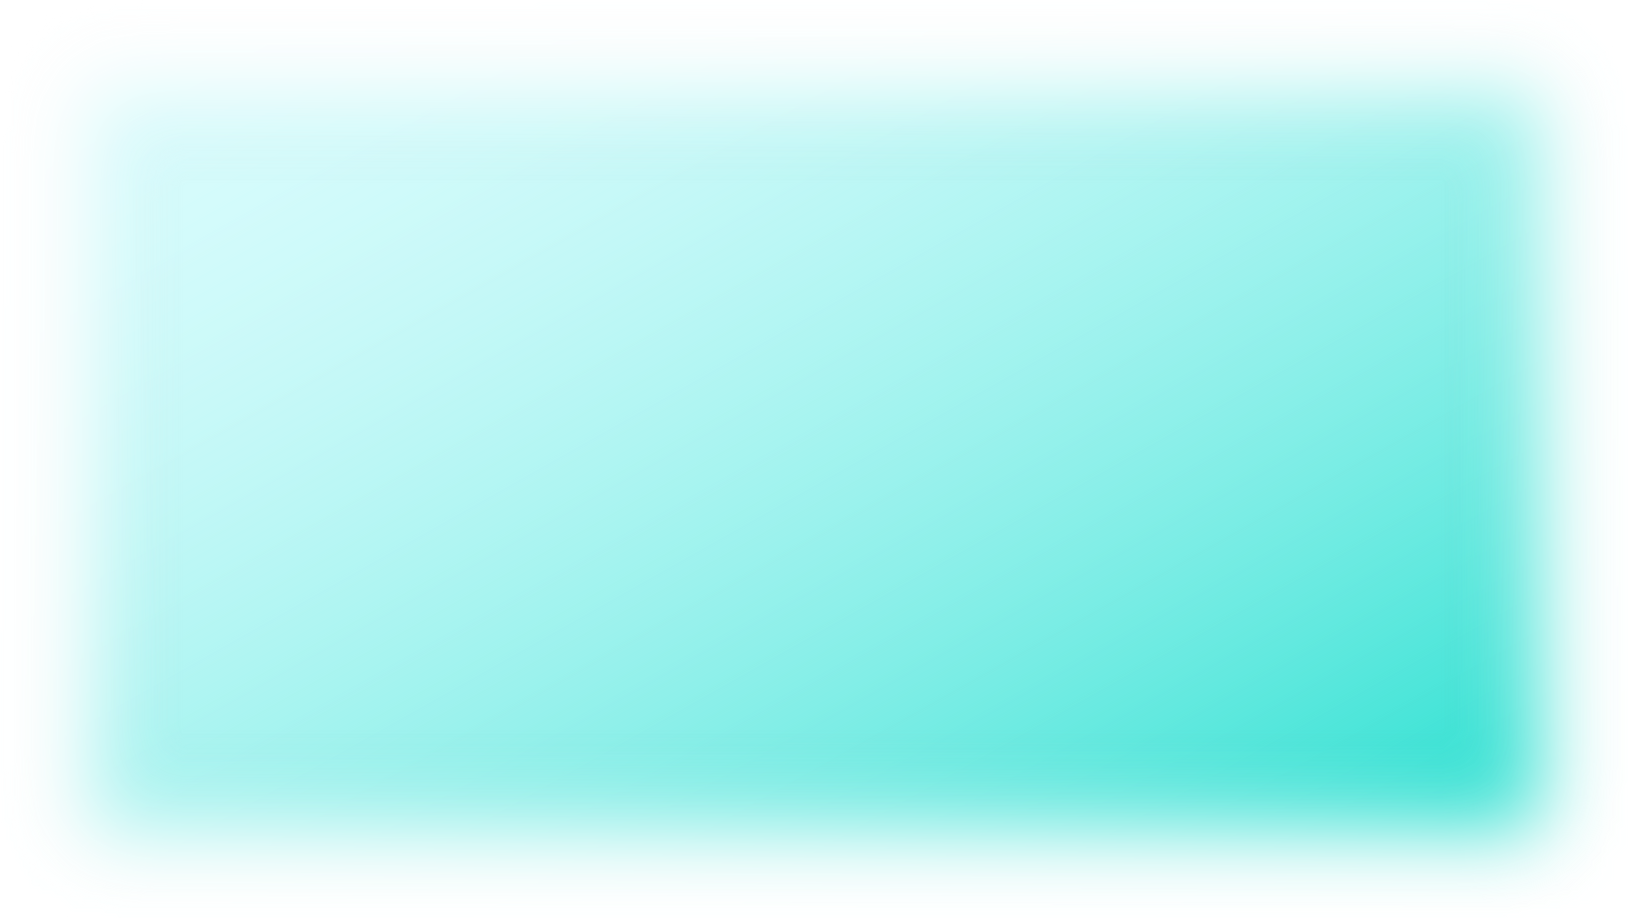 Turquoise Gradient Blurred Rectangle